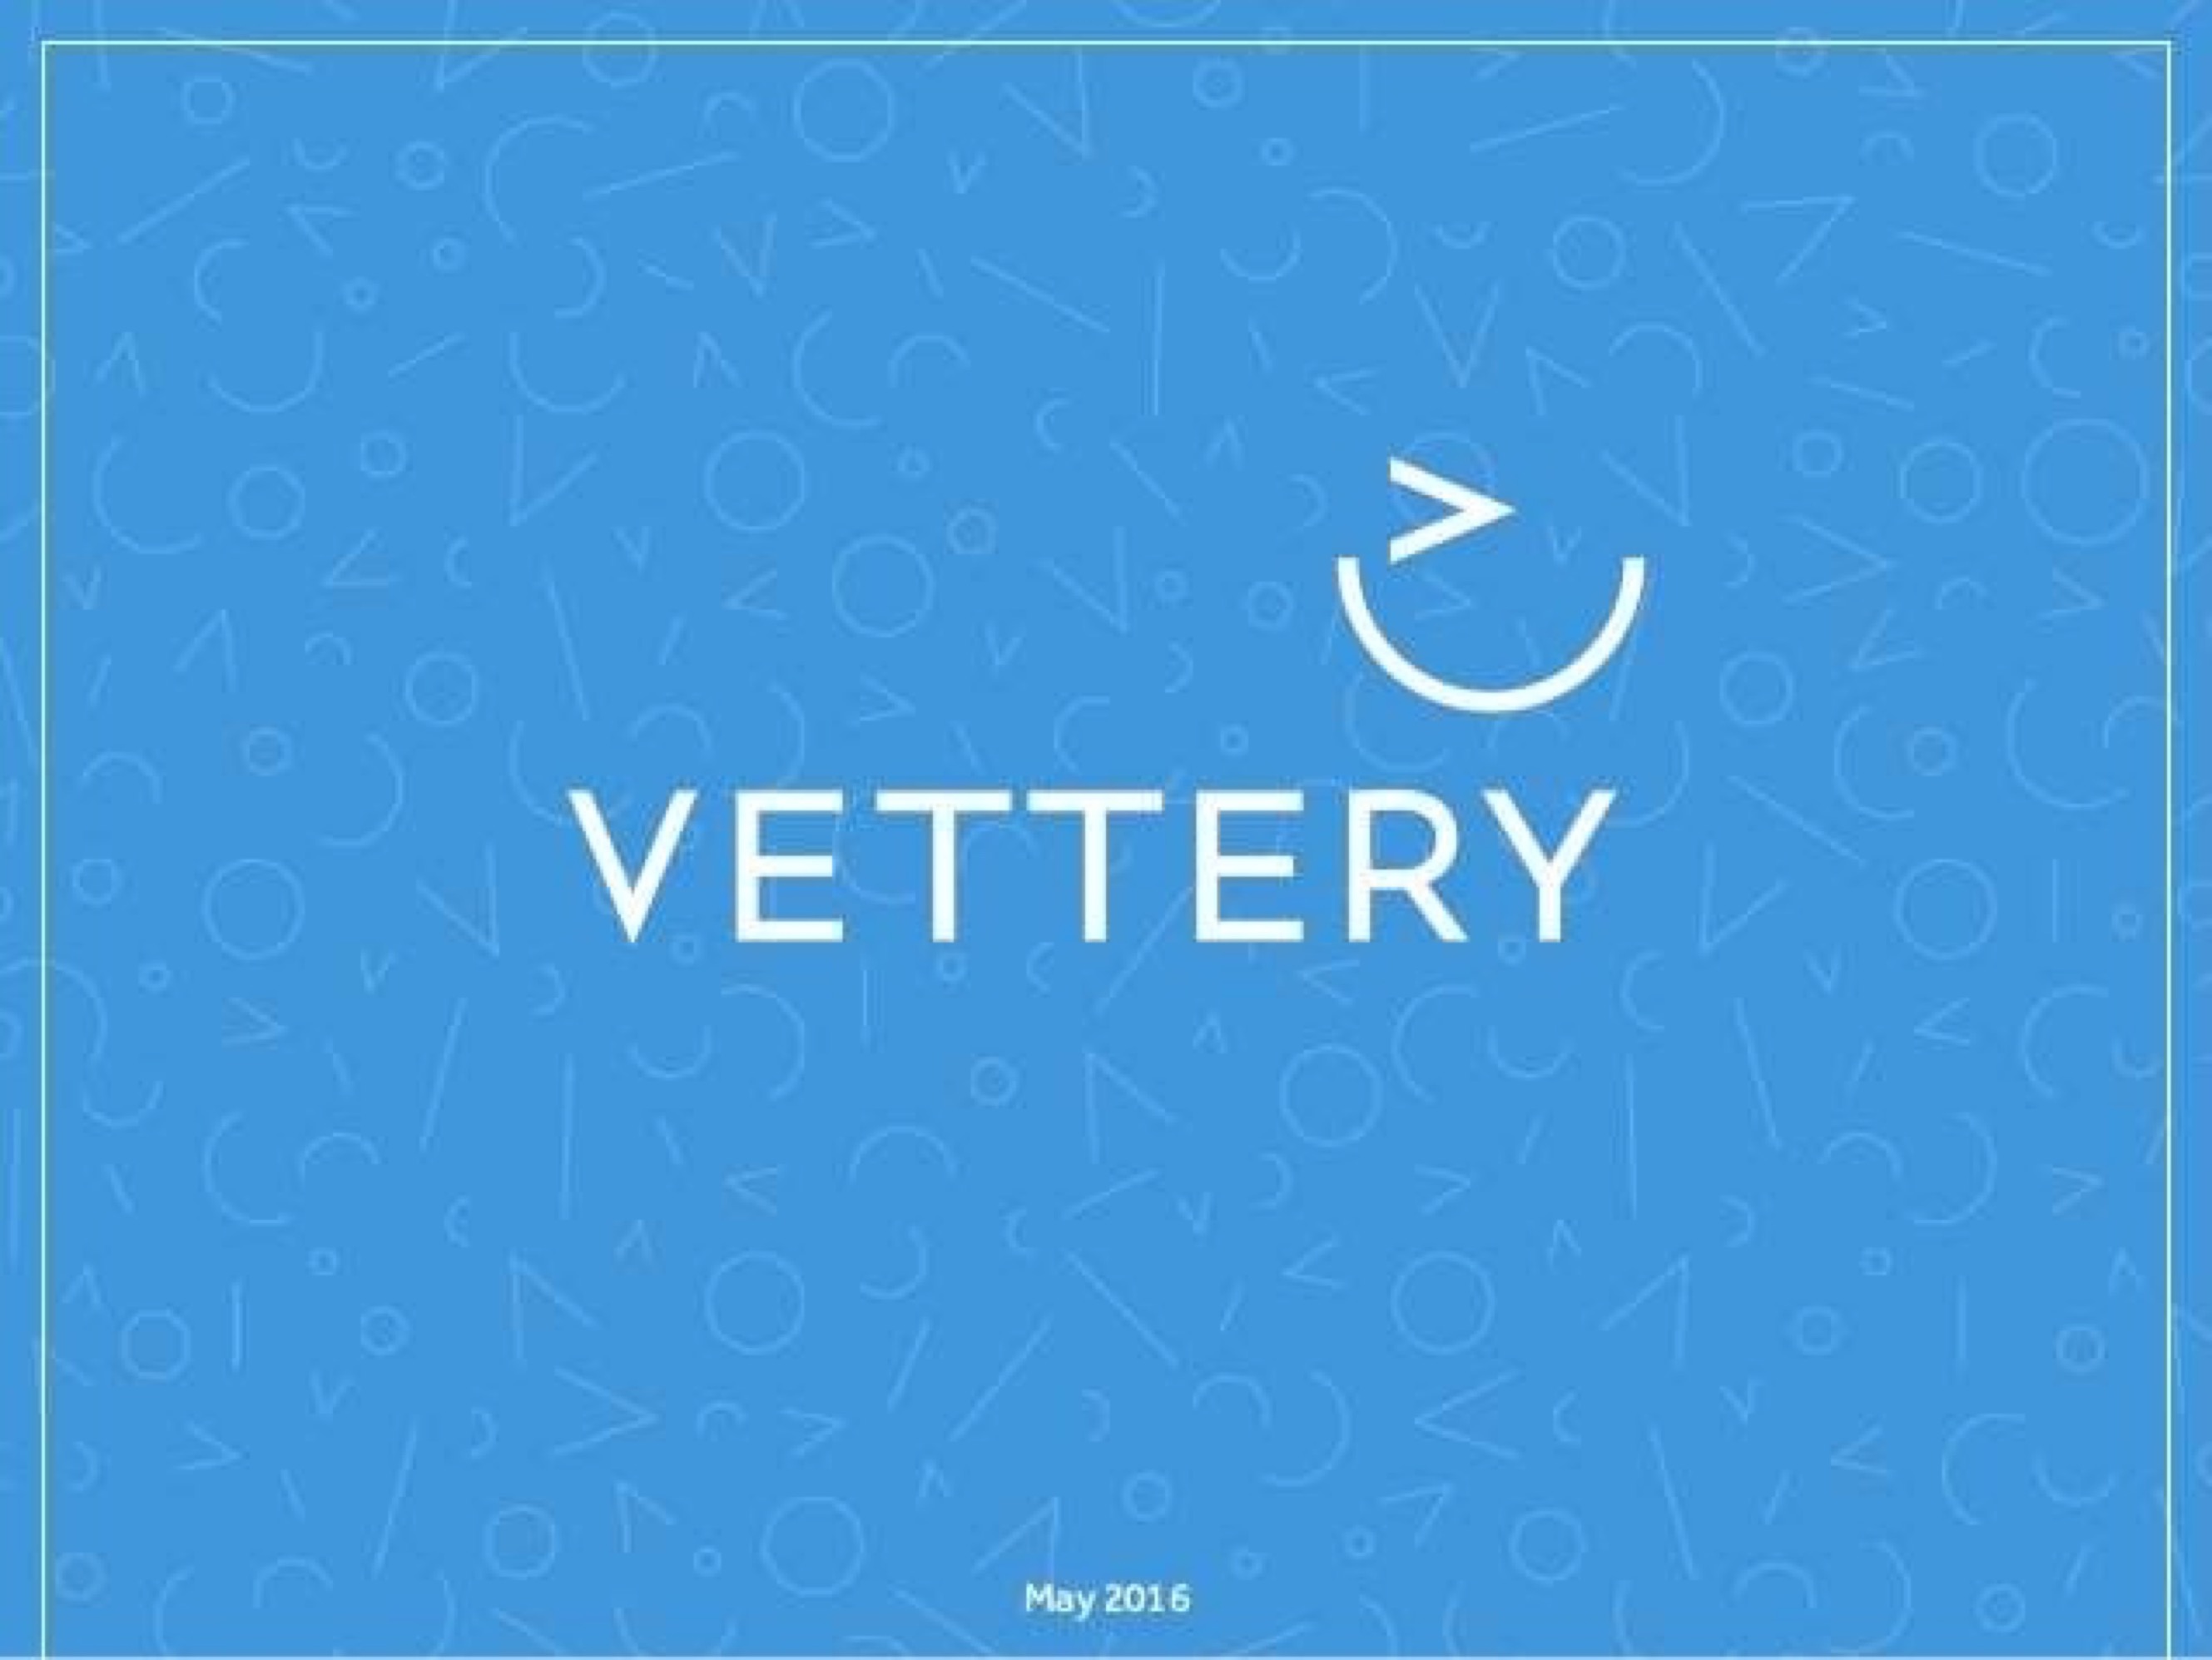 vettery-pitch-deck-001